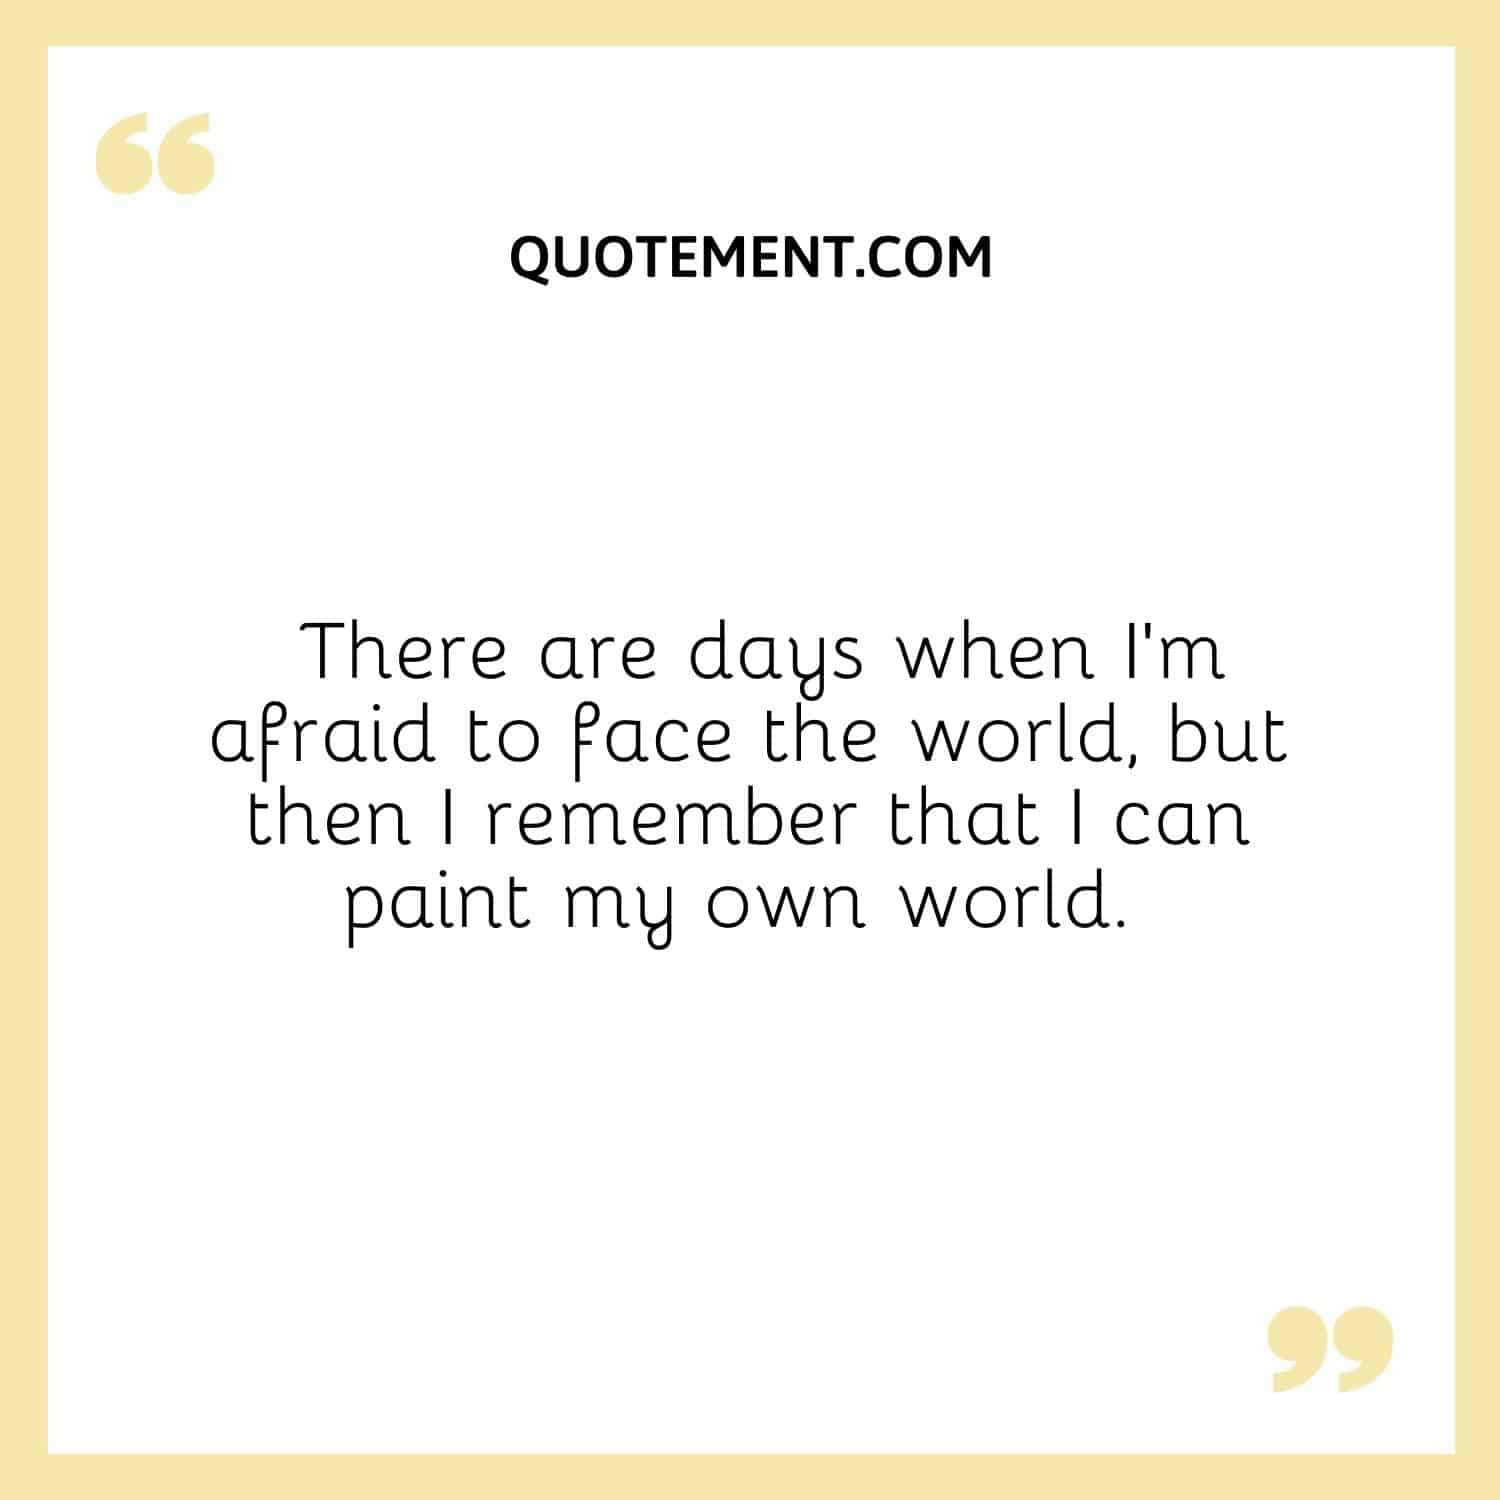 There are days when I’m afraid to face the world, but then I remember that I can paint my own world. 